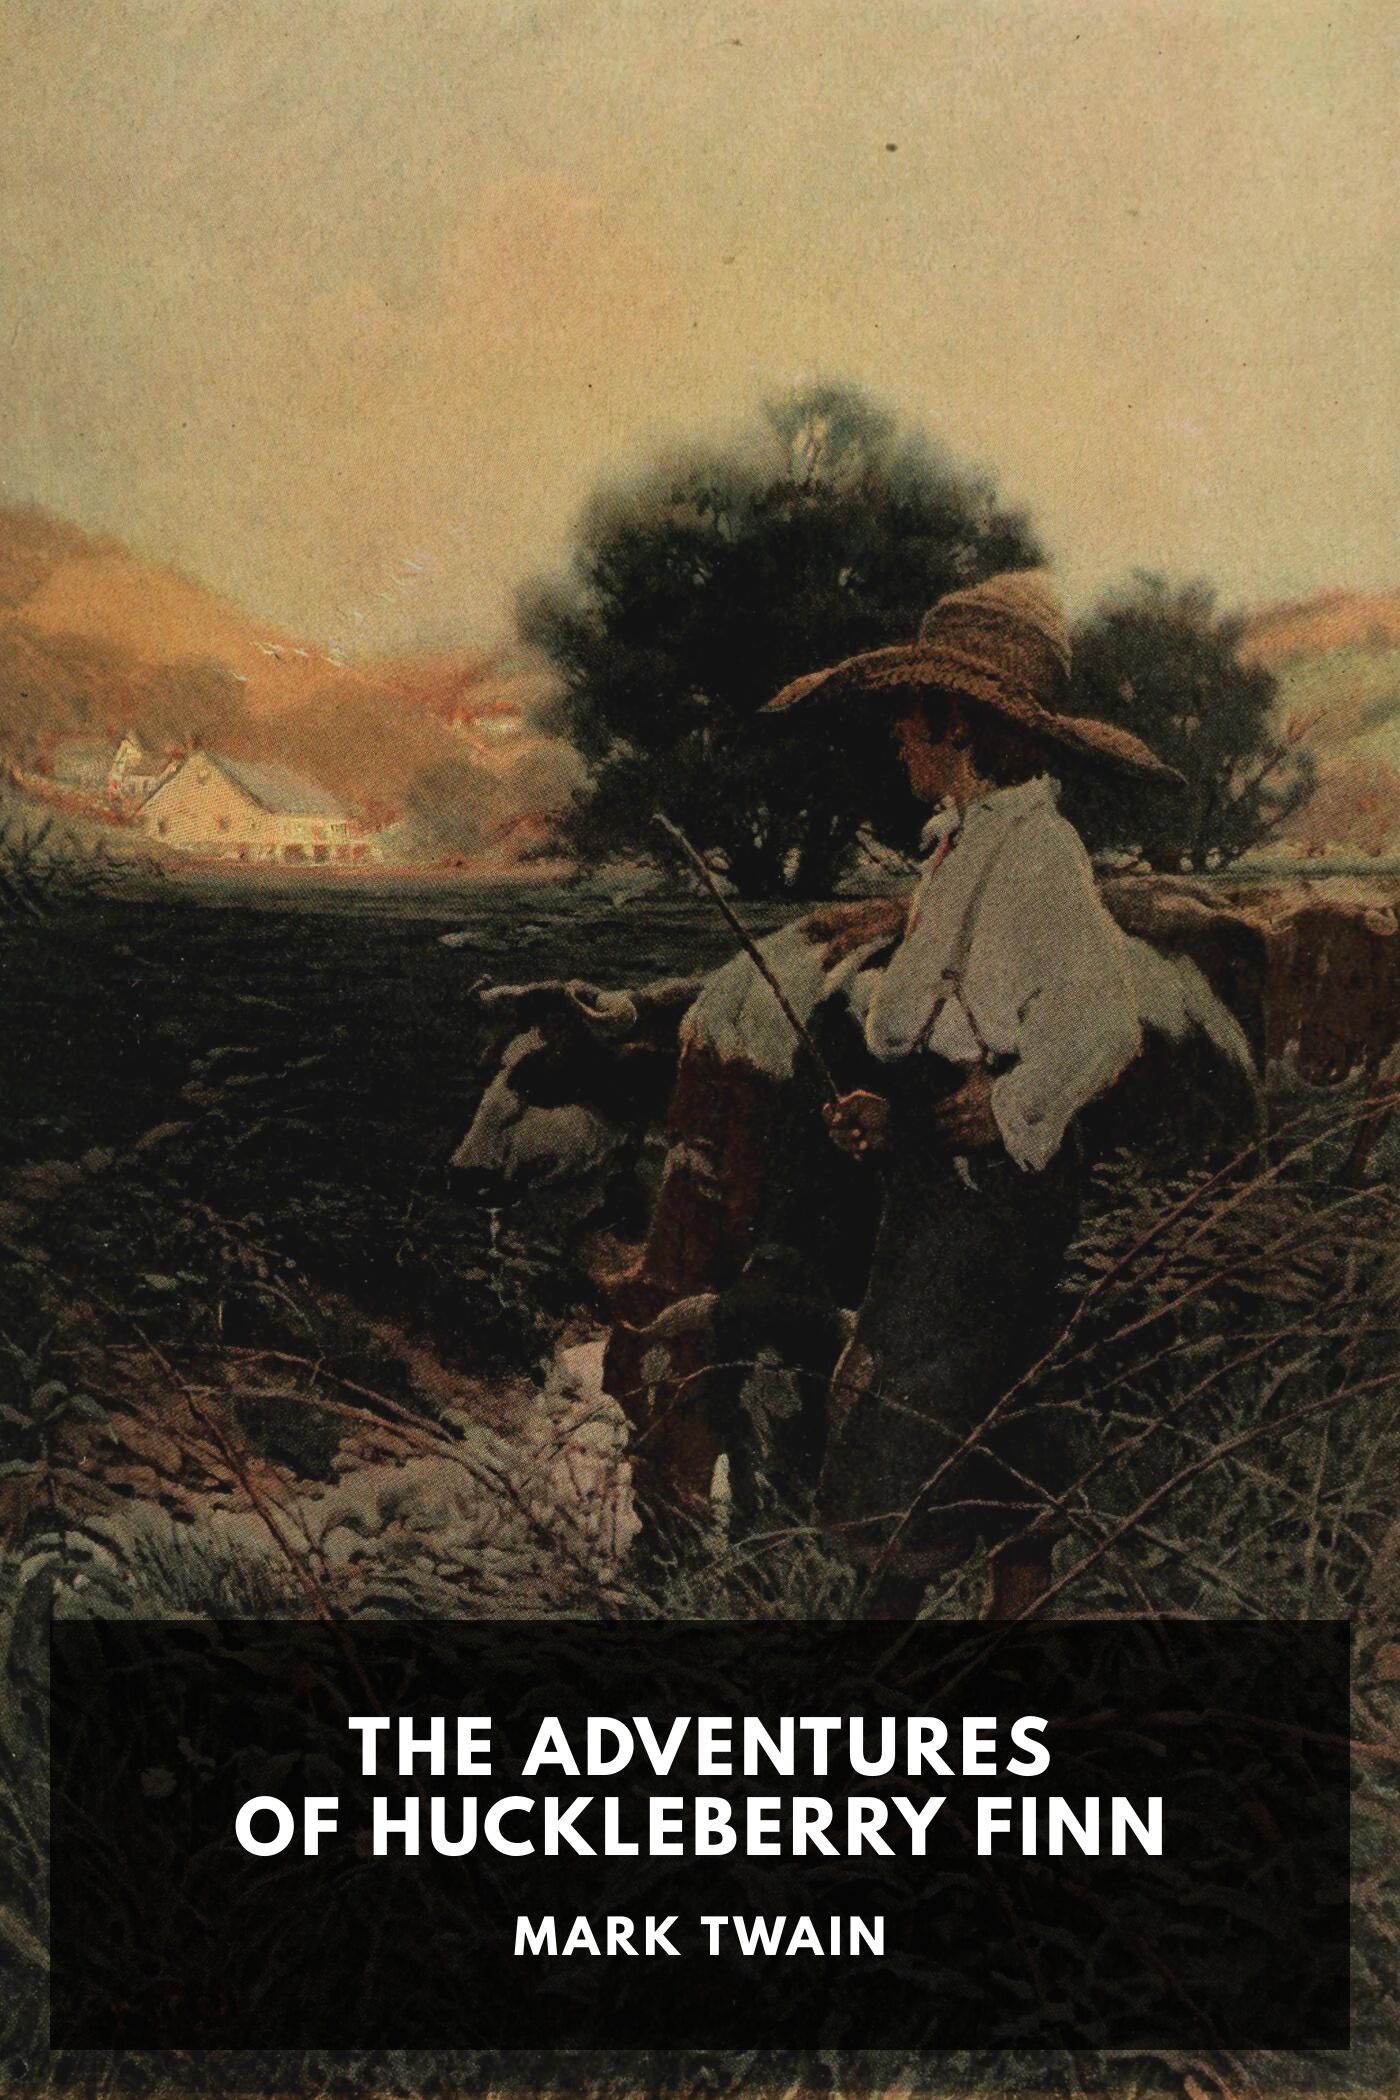 The Adventures of Huckleberry Finn download the new version